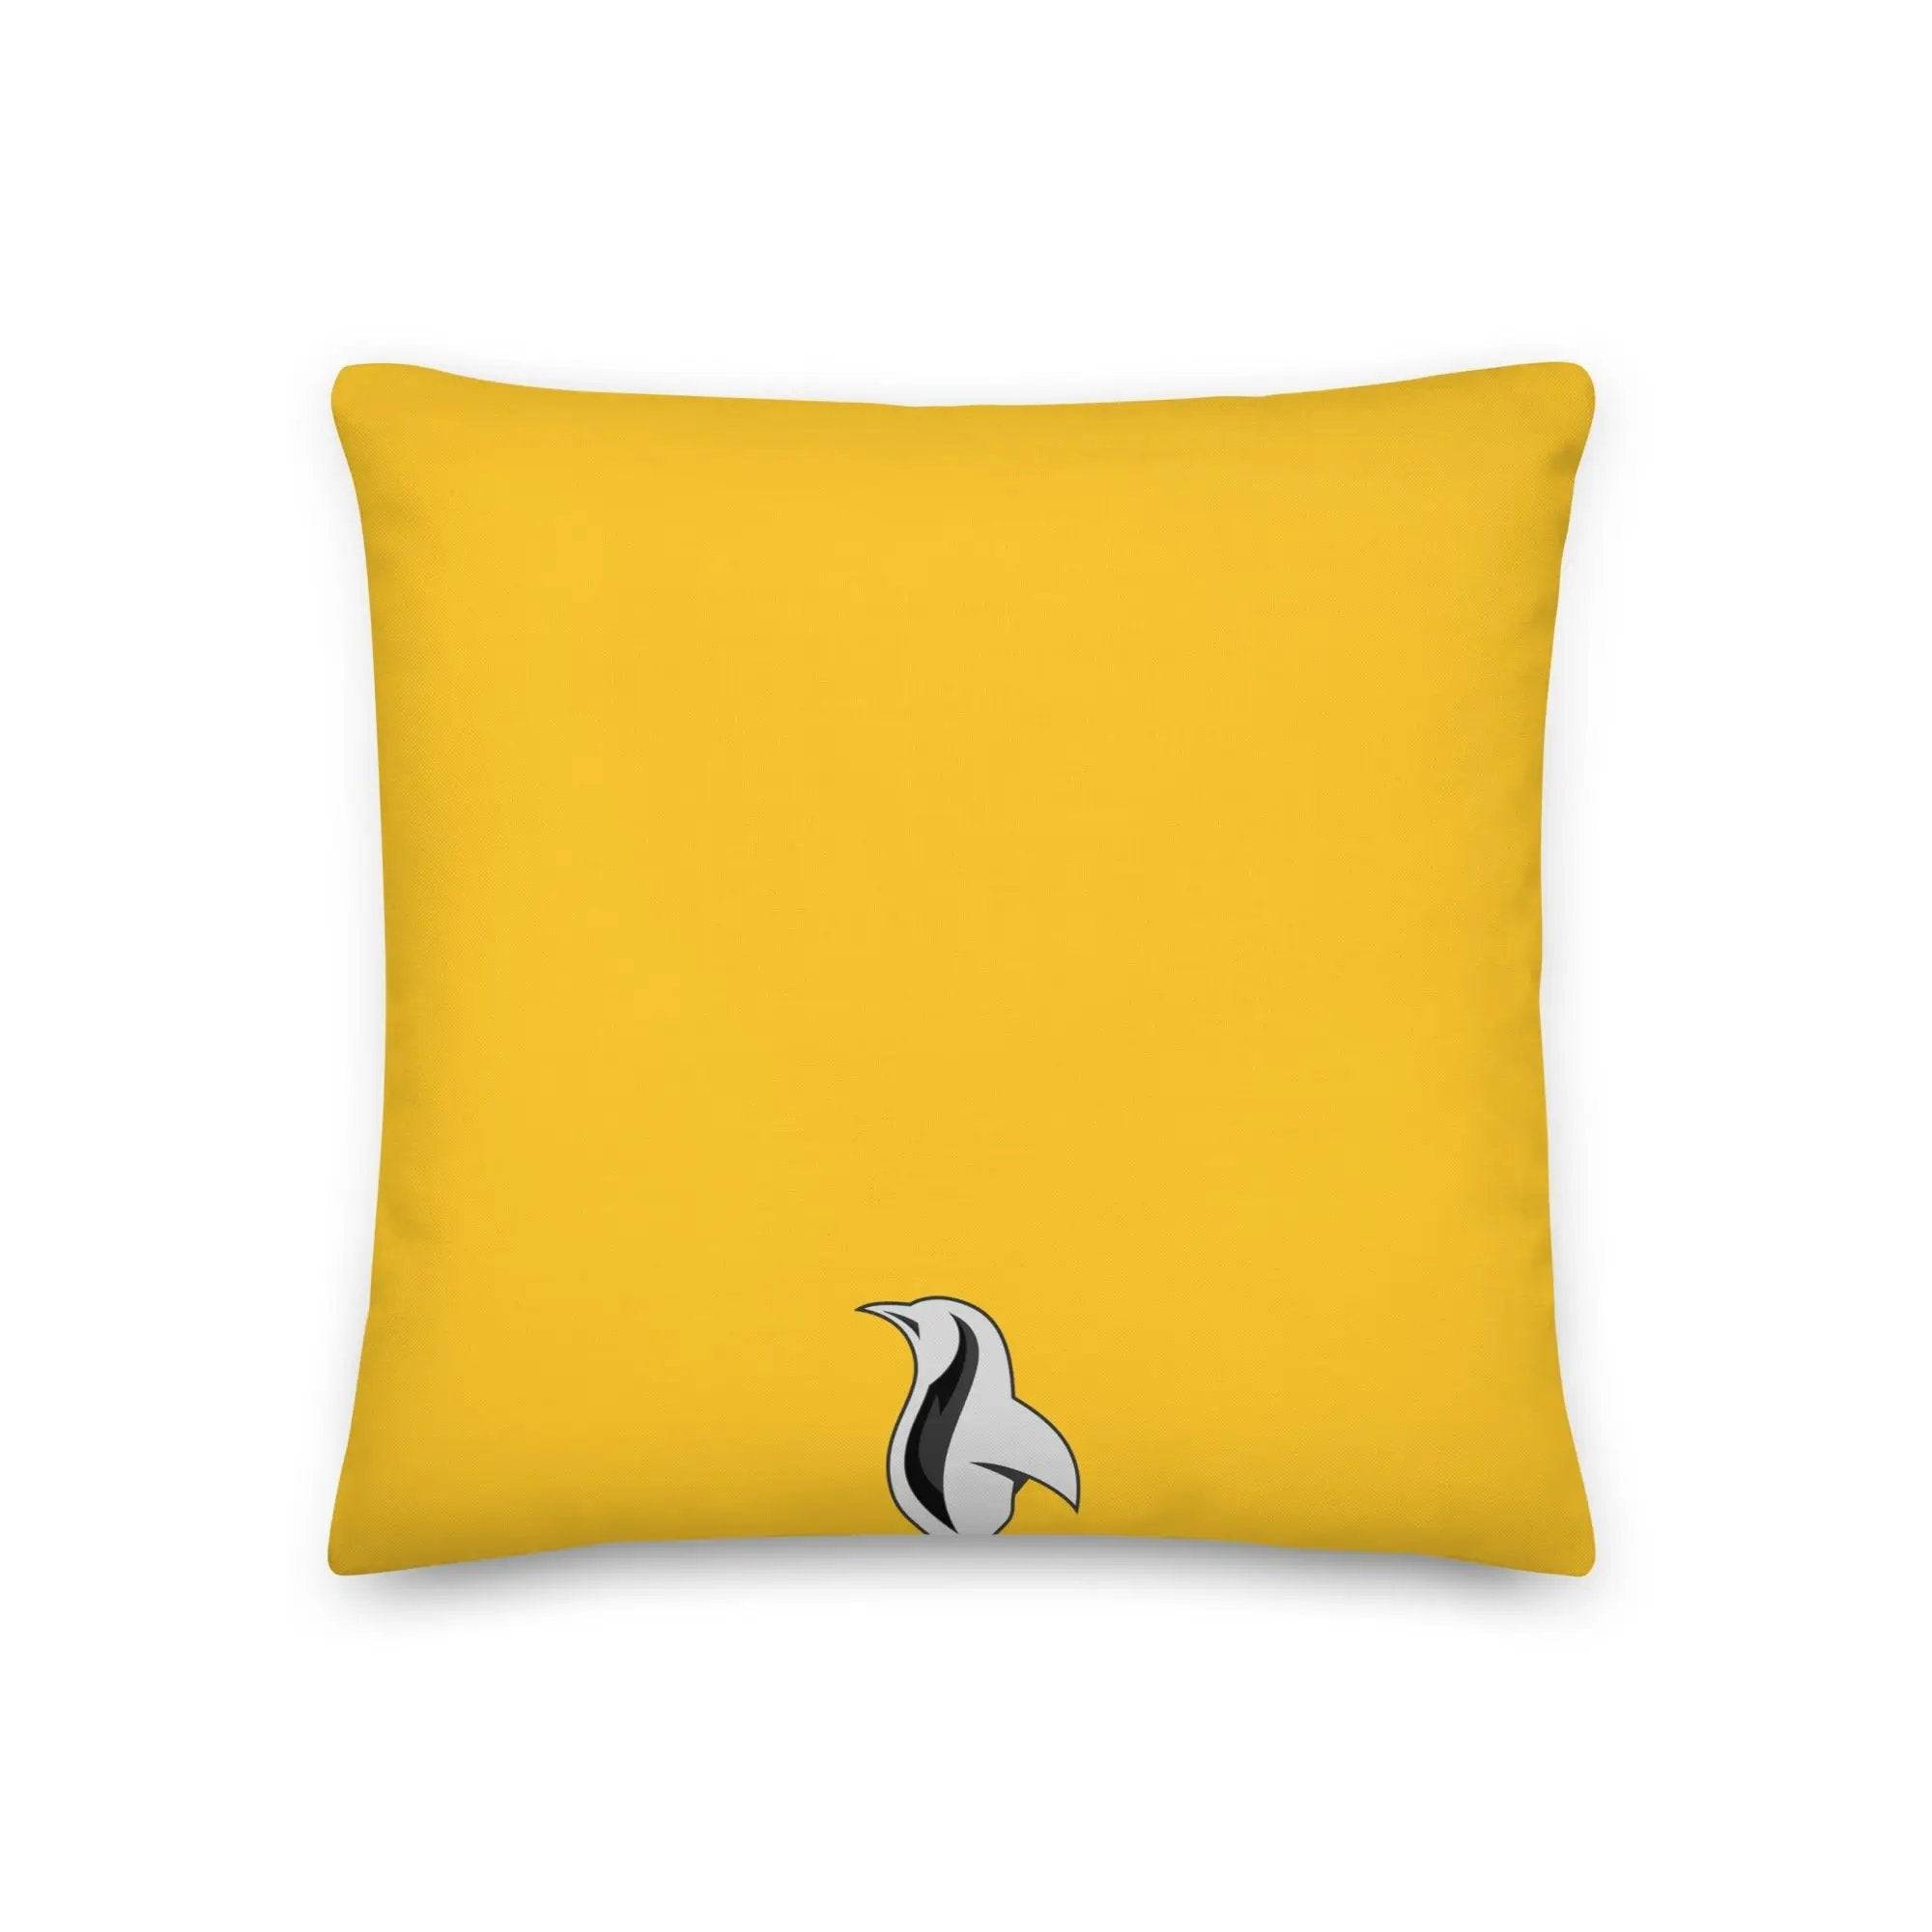 Yellow Pillow with a cocktail and rug